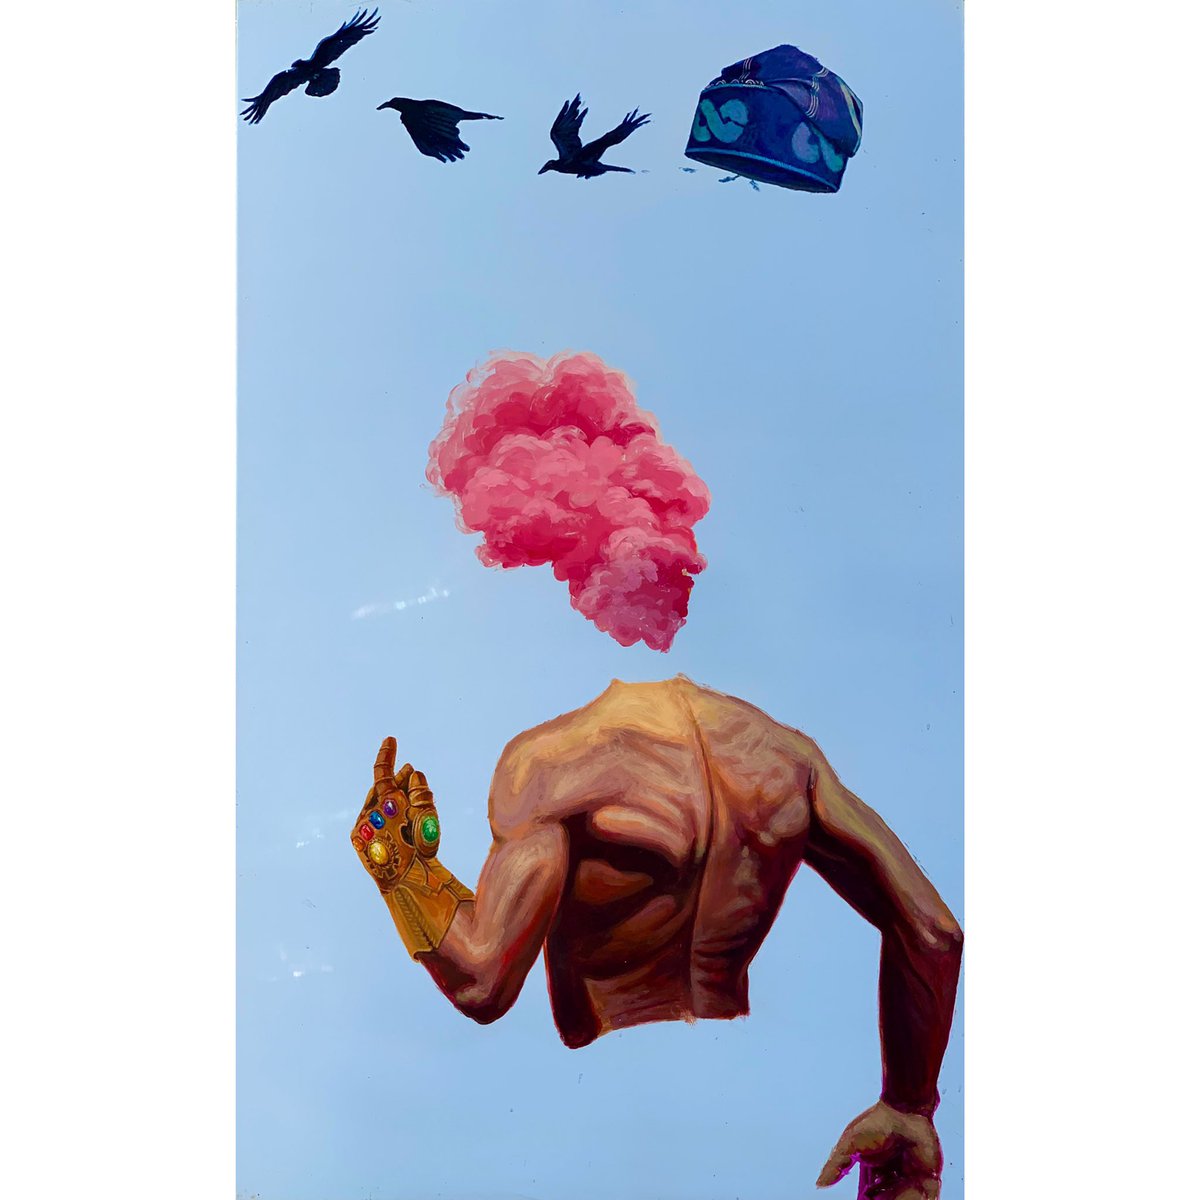 “Dracarys 1 & 2, Thanos and his little birds” are a series of paintings I made back in 2020,  long before ‘The one who must not be named’ declared that he was running for president.

It’s really sad to see those predictions come to pass. #prayforNigeria